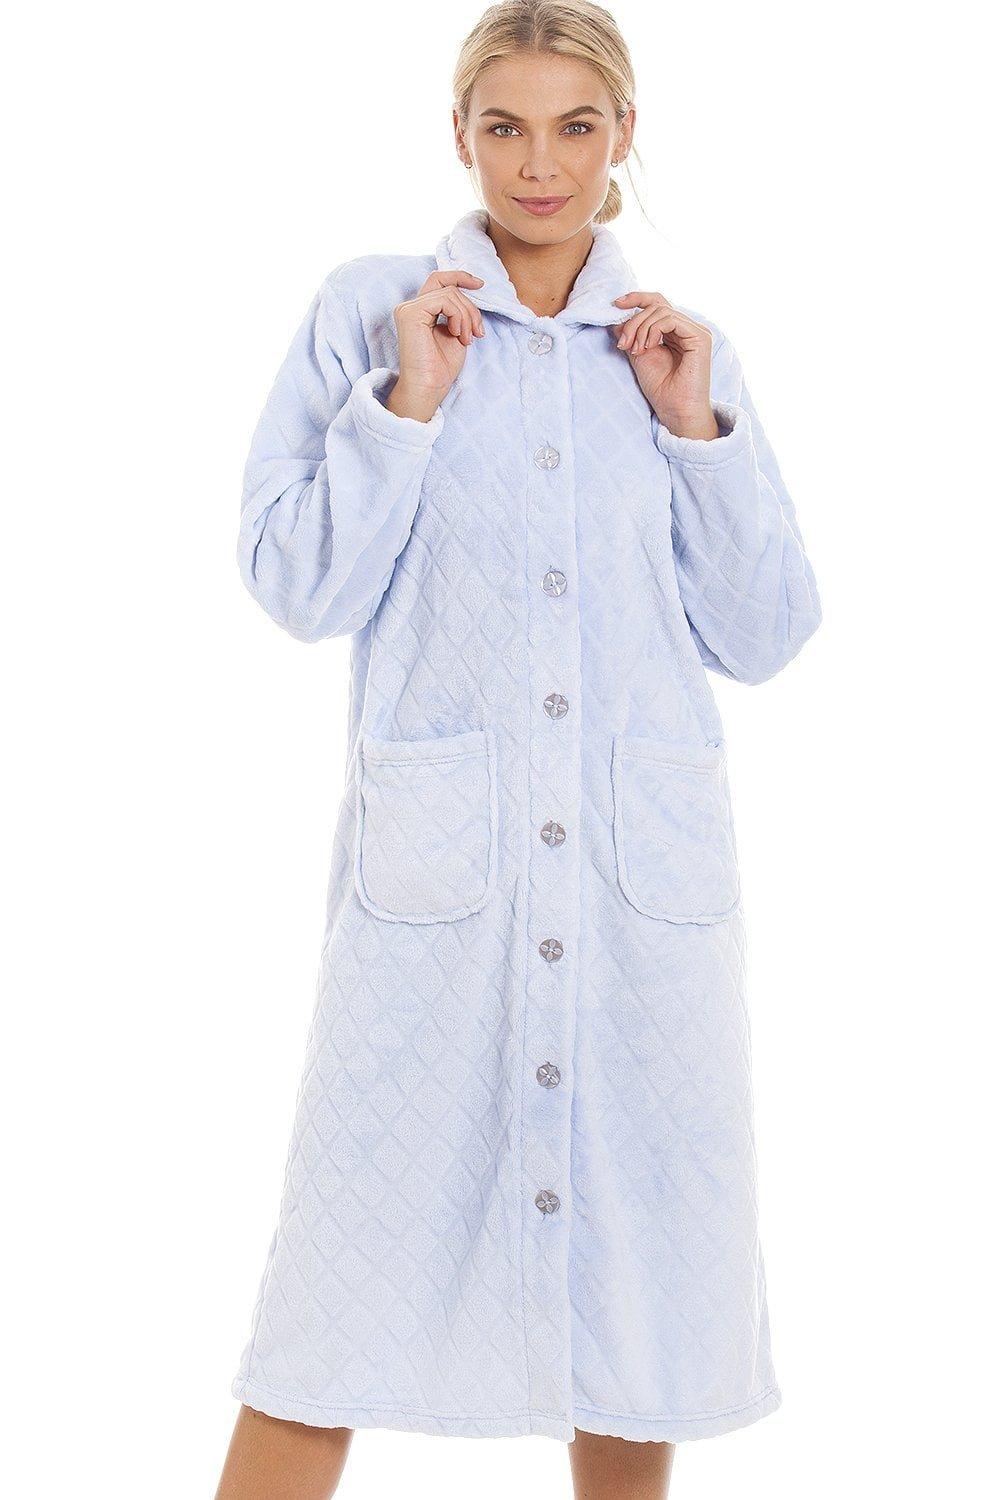 Classic Supersoft Diamond Print Button Up Housecoat